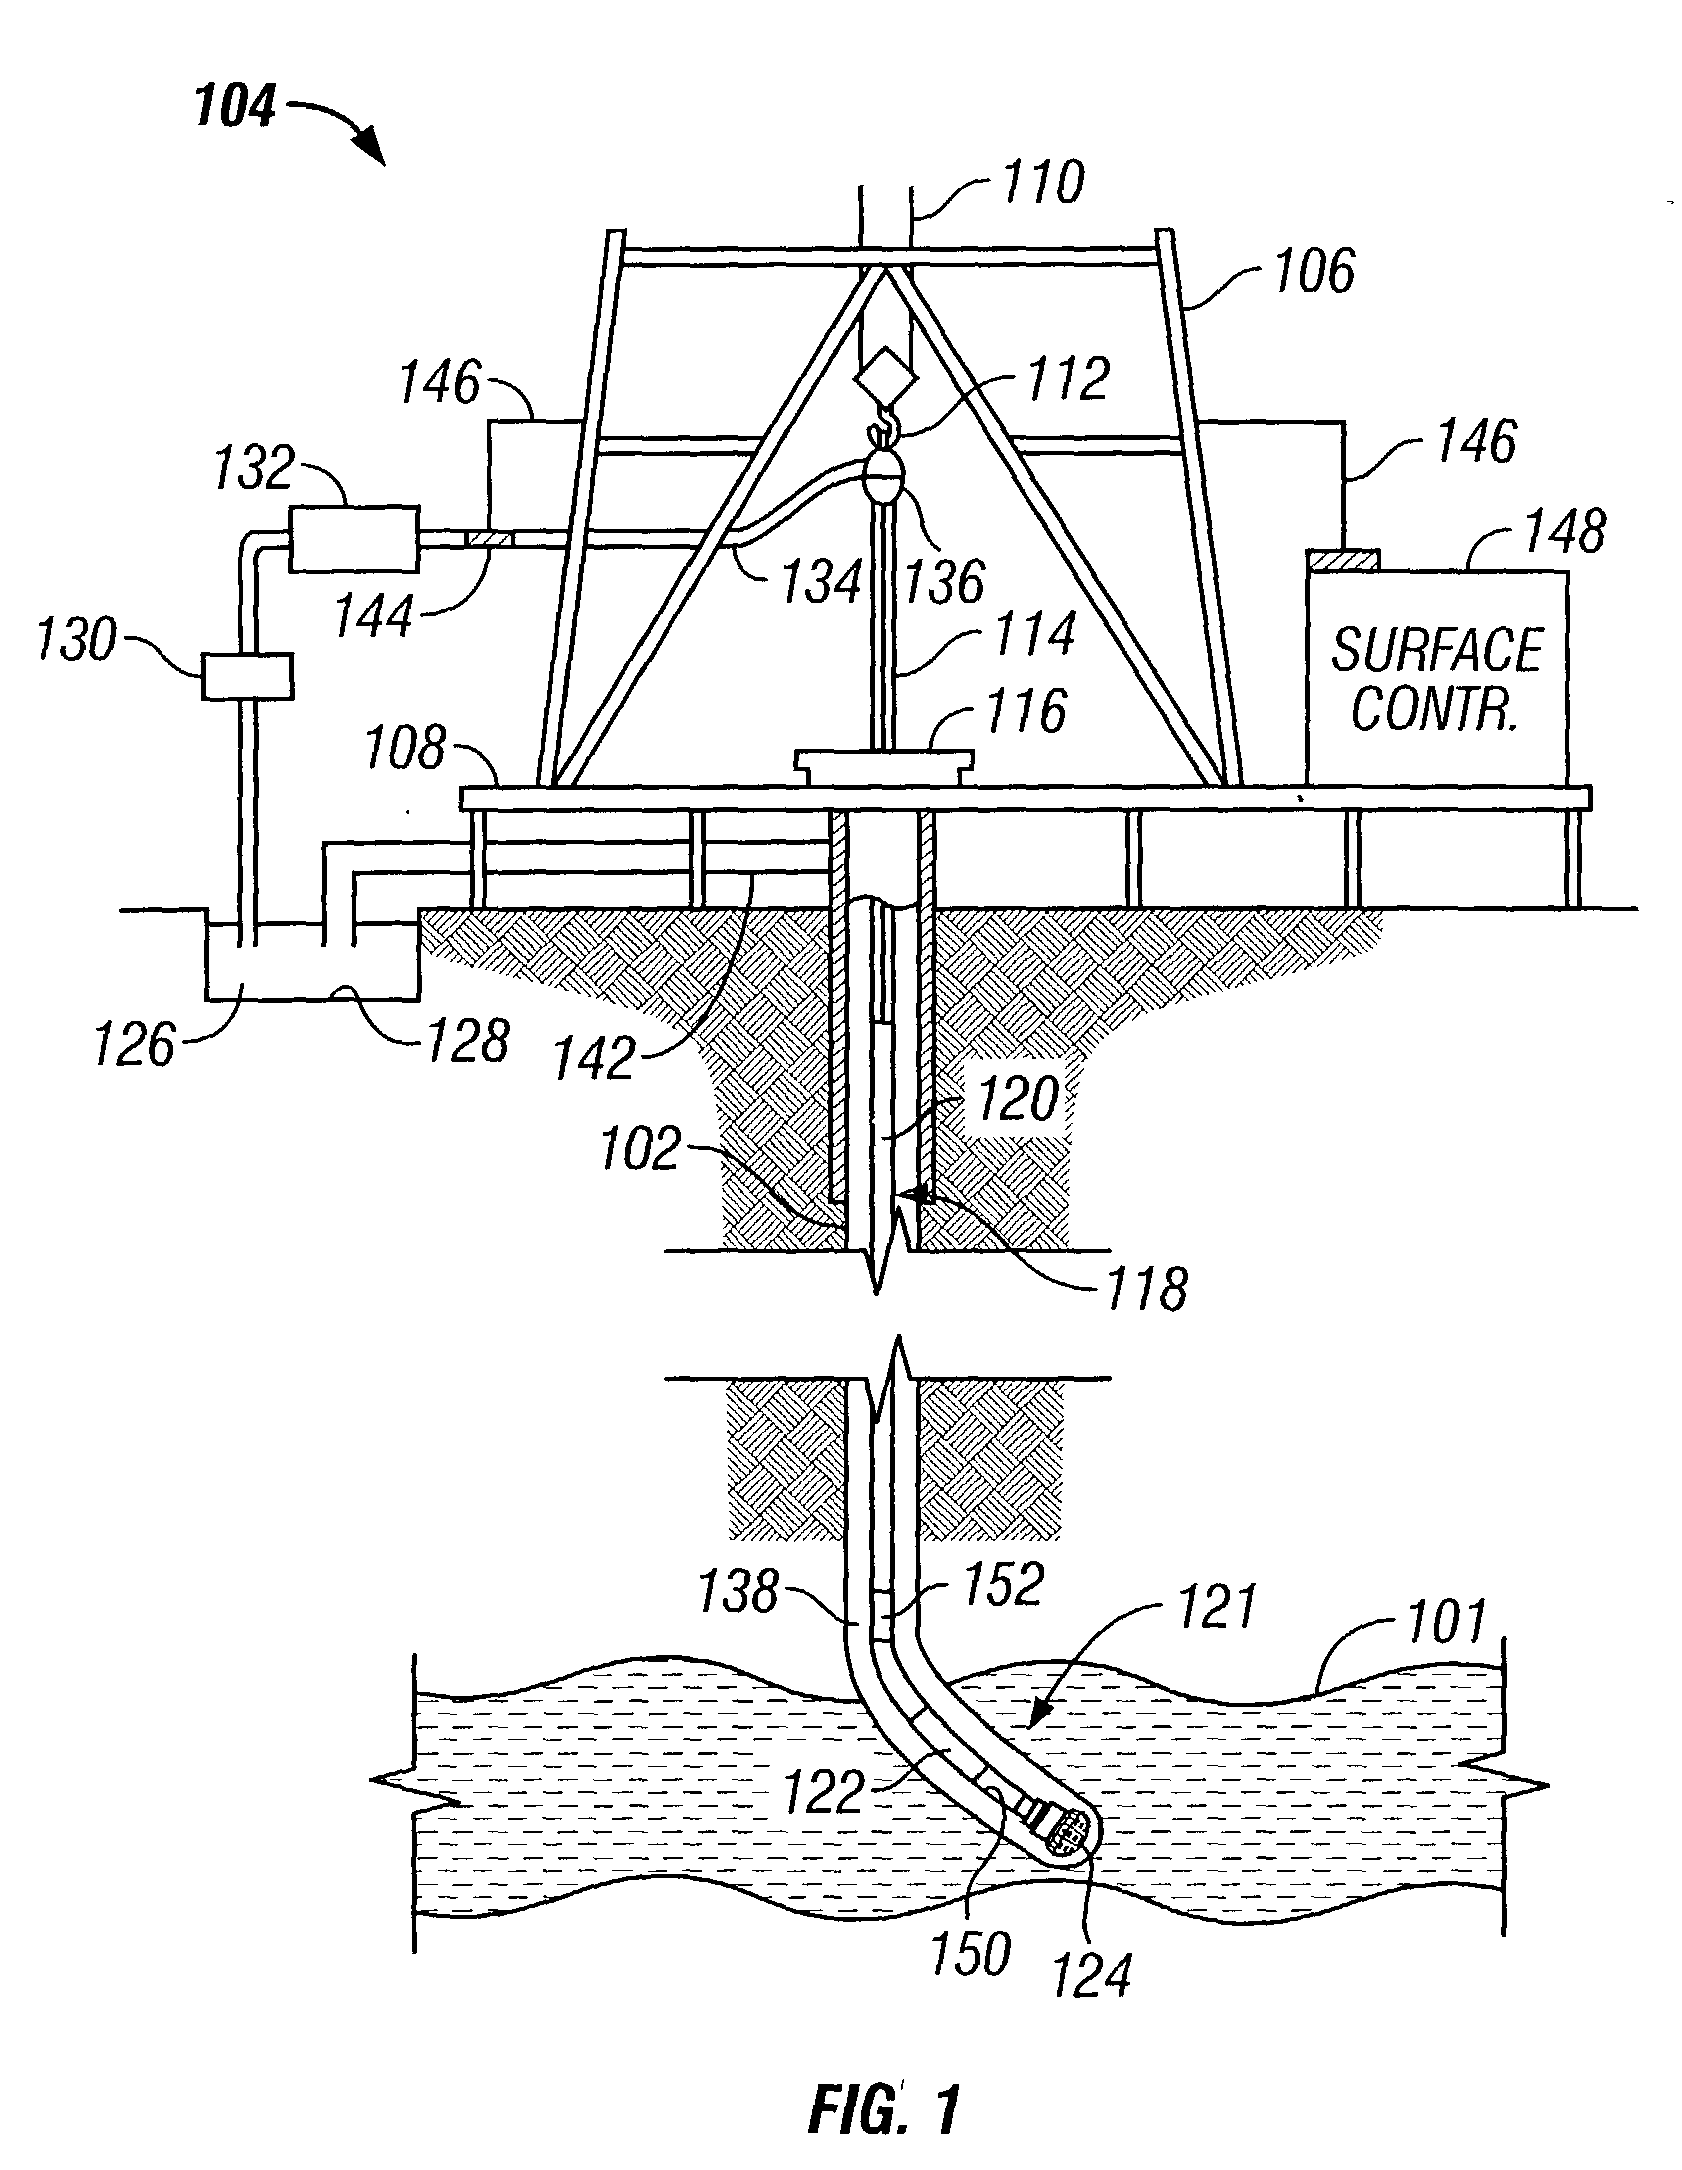 Method for cleaning and sealing a well borehole portion for formation evaluation